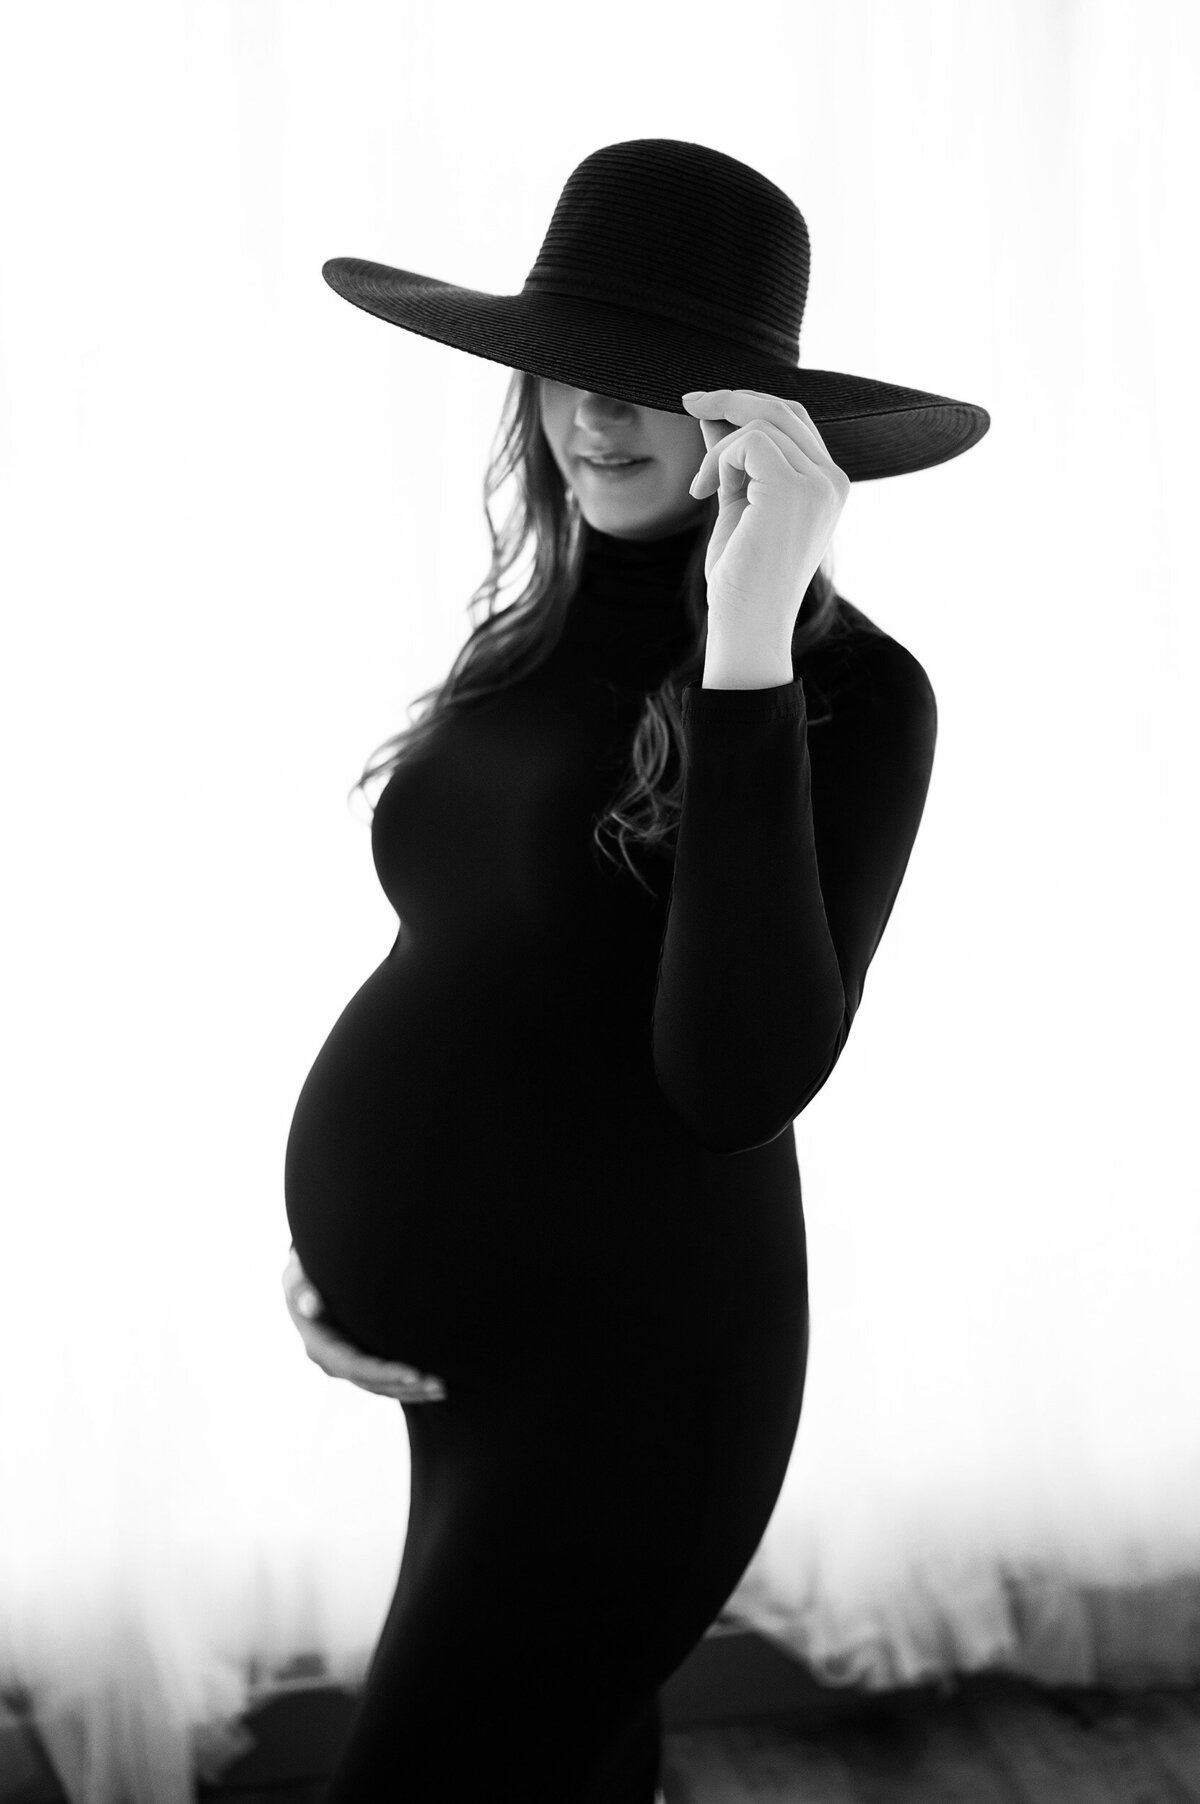 Black and white image of a pregnant woman in a black bodycon maternity dress and black sunhat that covers her eyes.